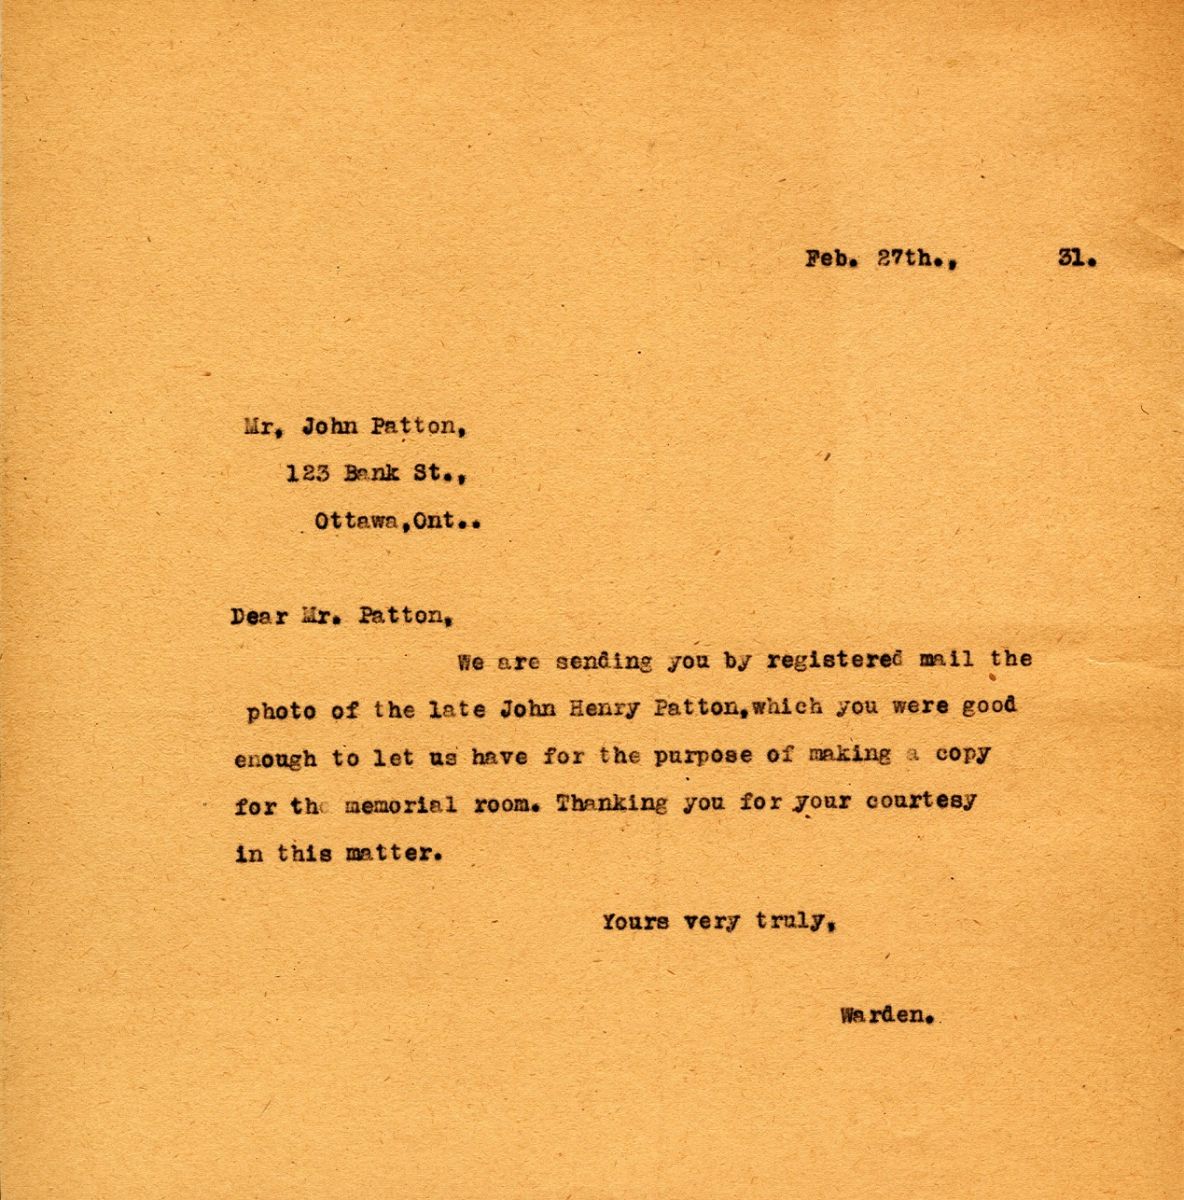 Letter from the Warden to Mr. John Patton, 27th February 1931